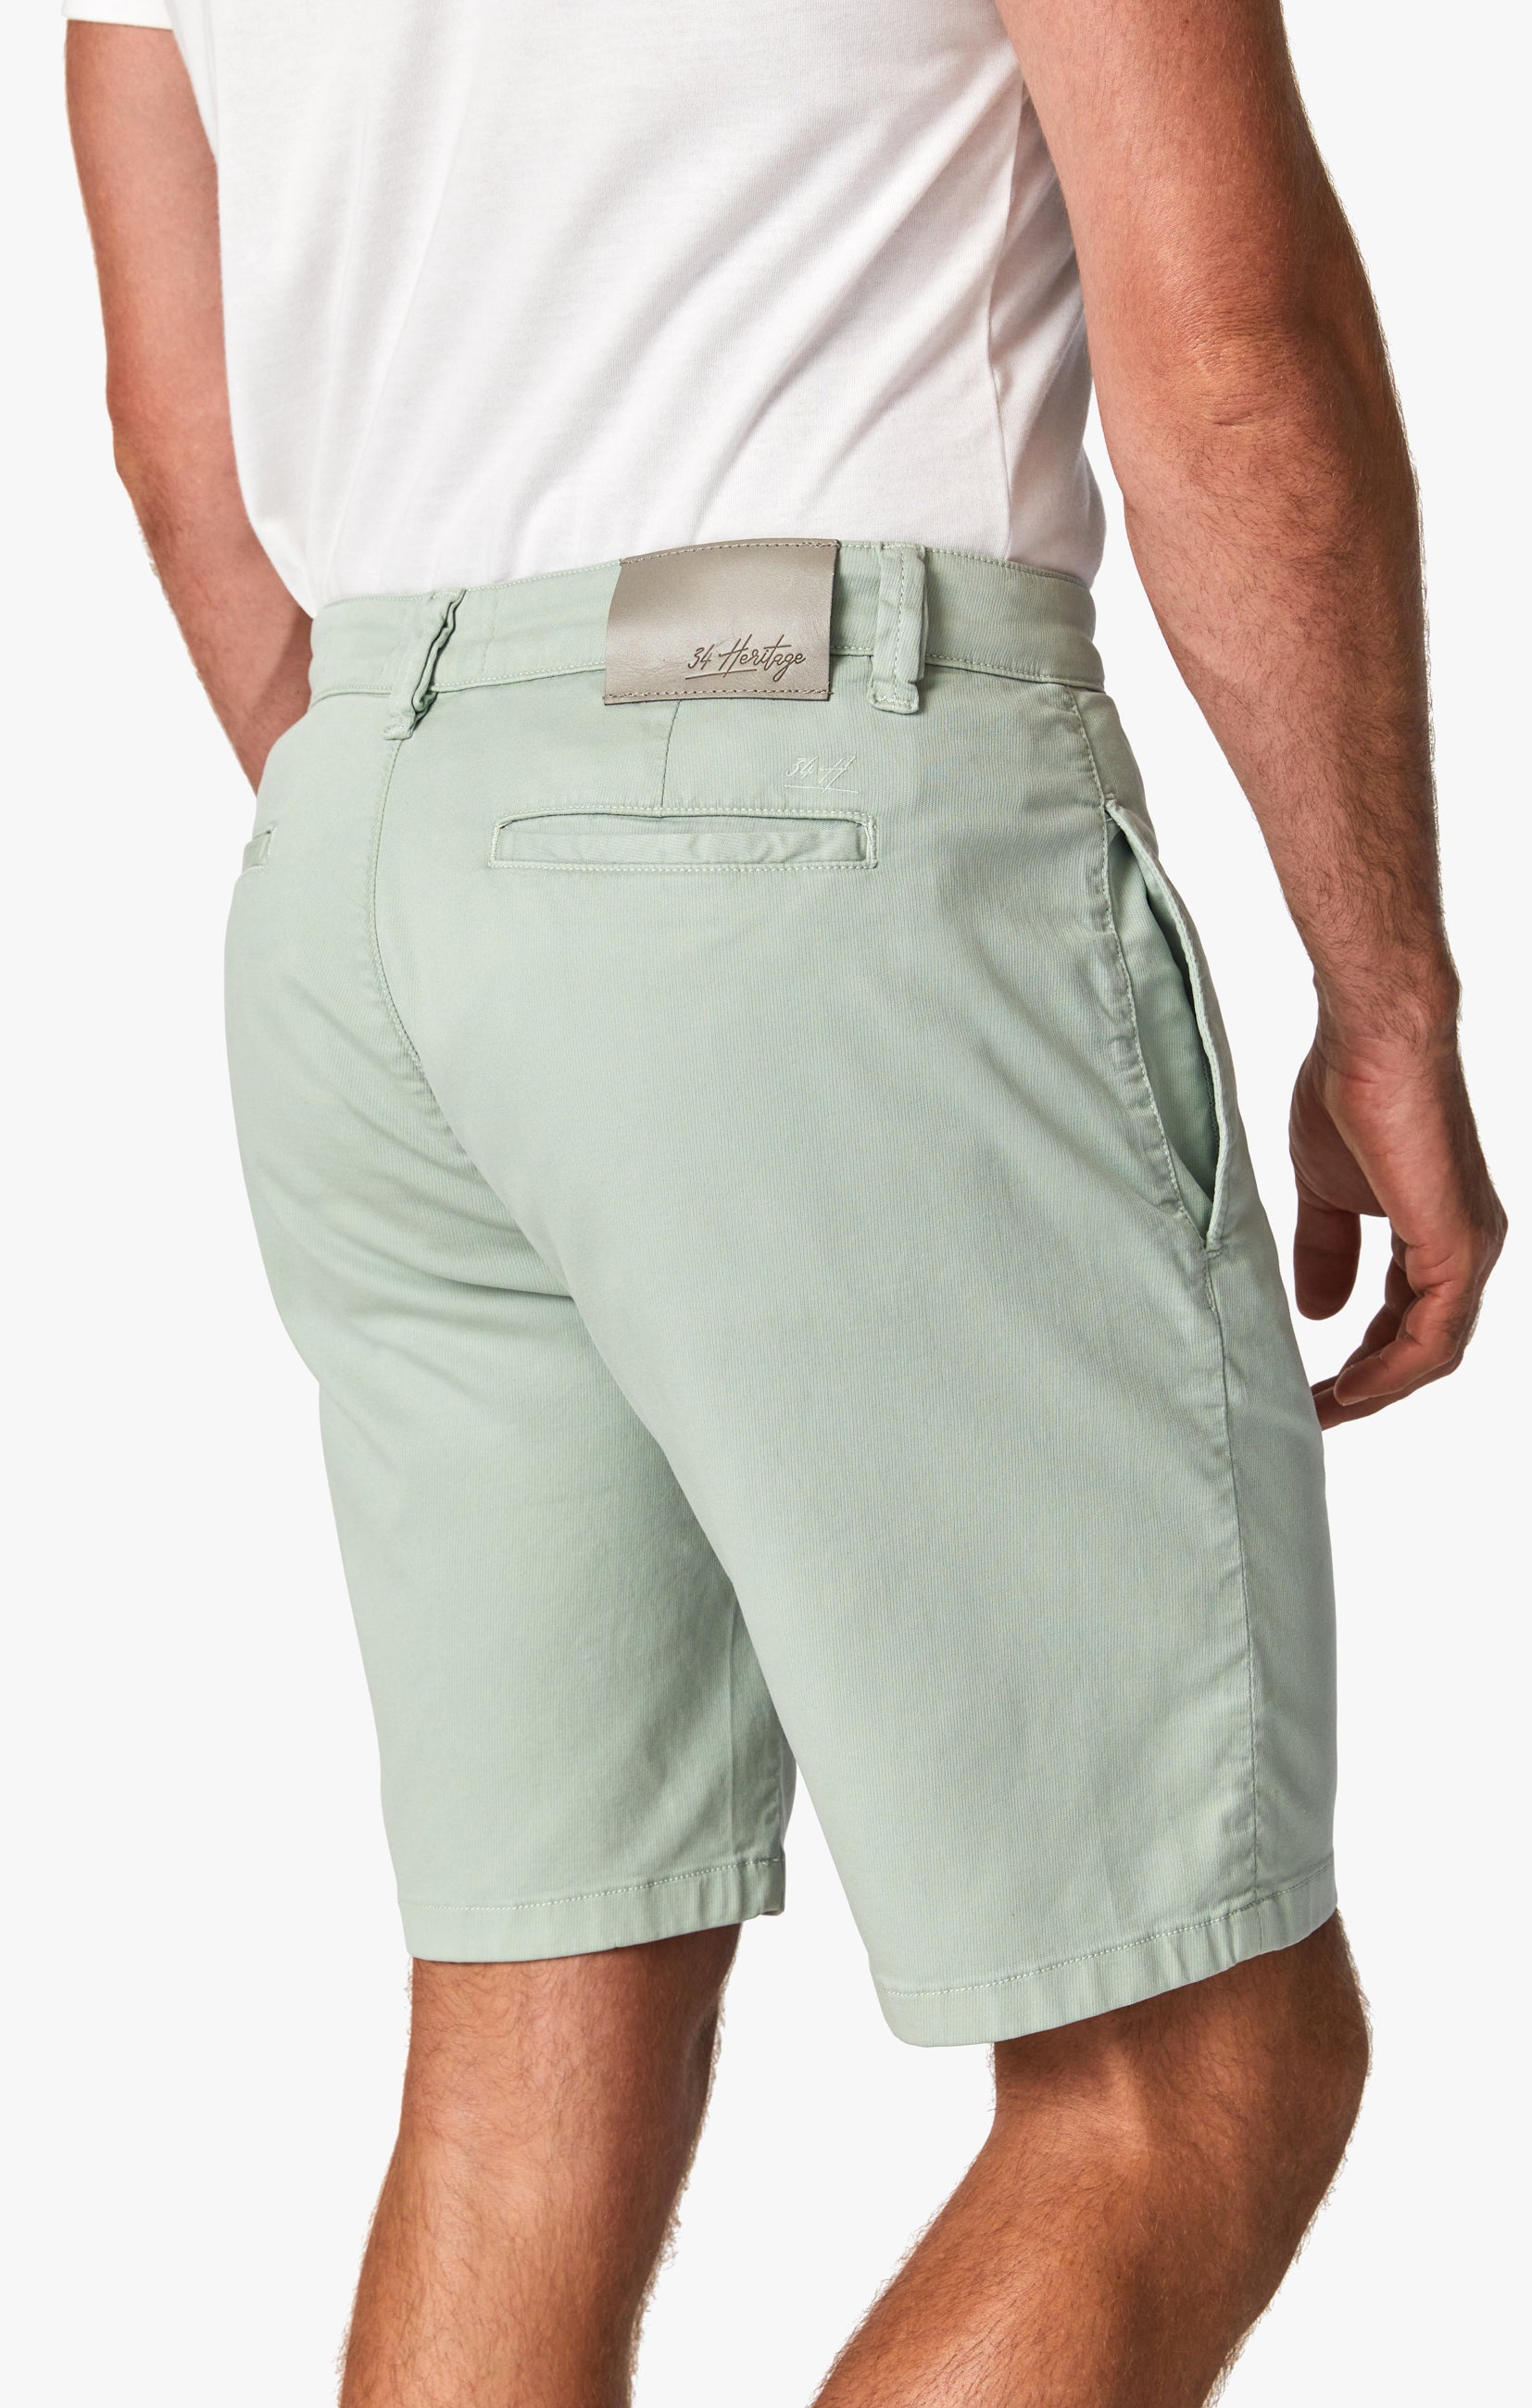 Nevada Shorts In Mint Soft Touch Image 5